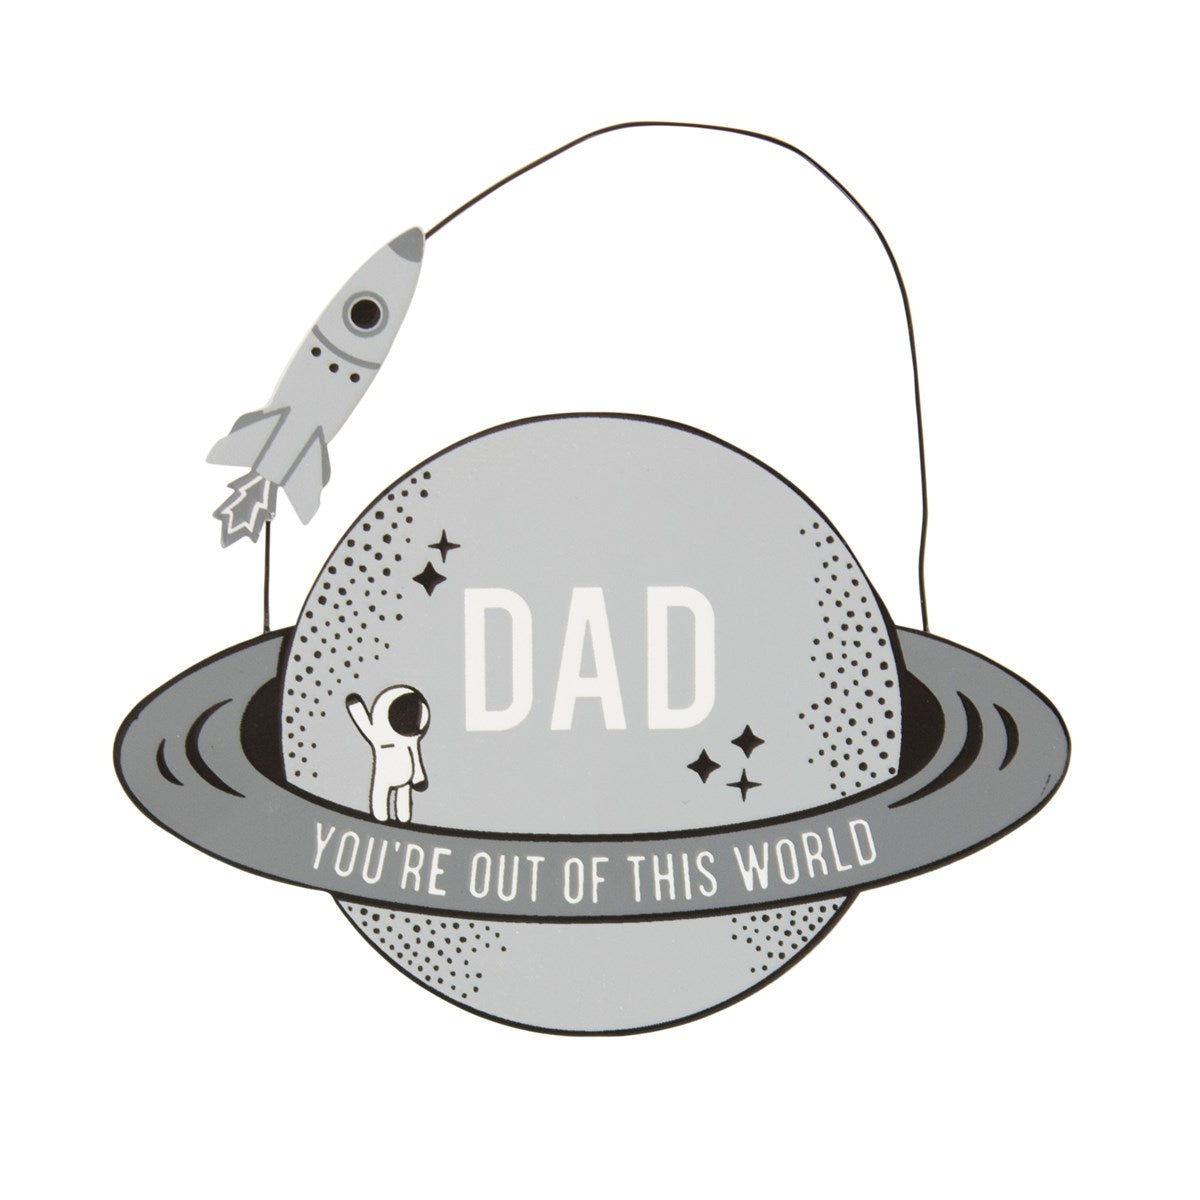 DAD YOU'RE OUT OF THIS WORLD WOODEN PLAQUE